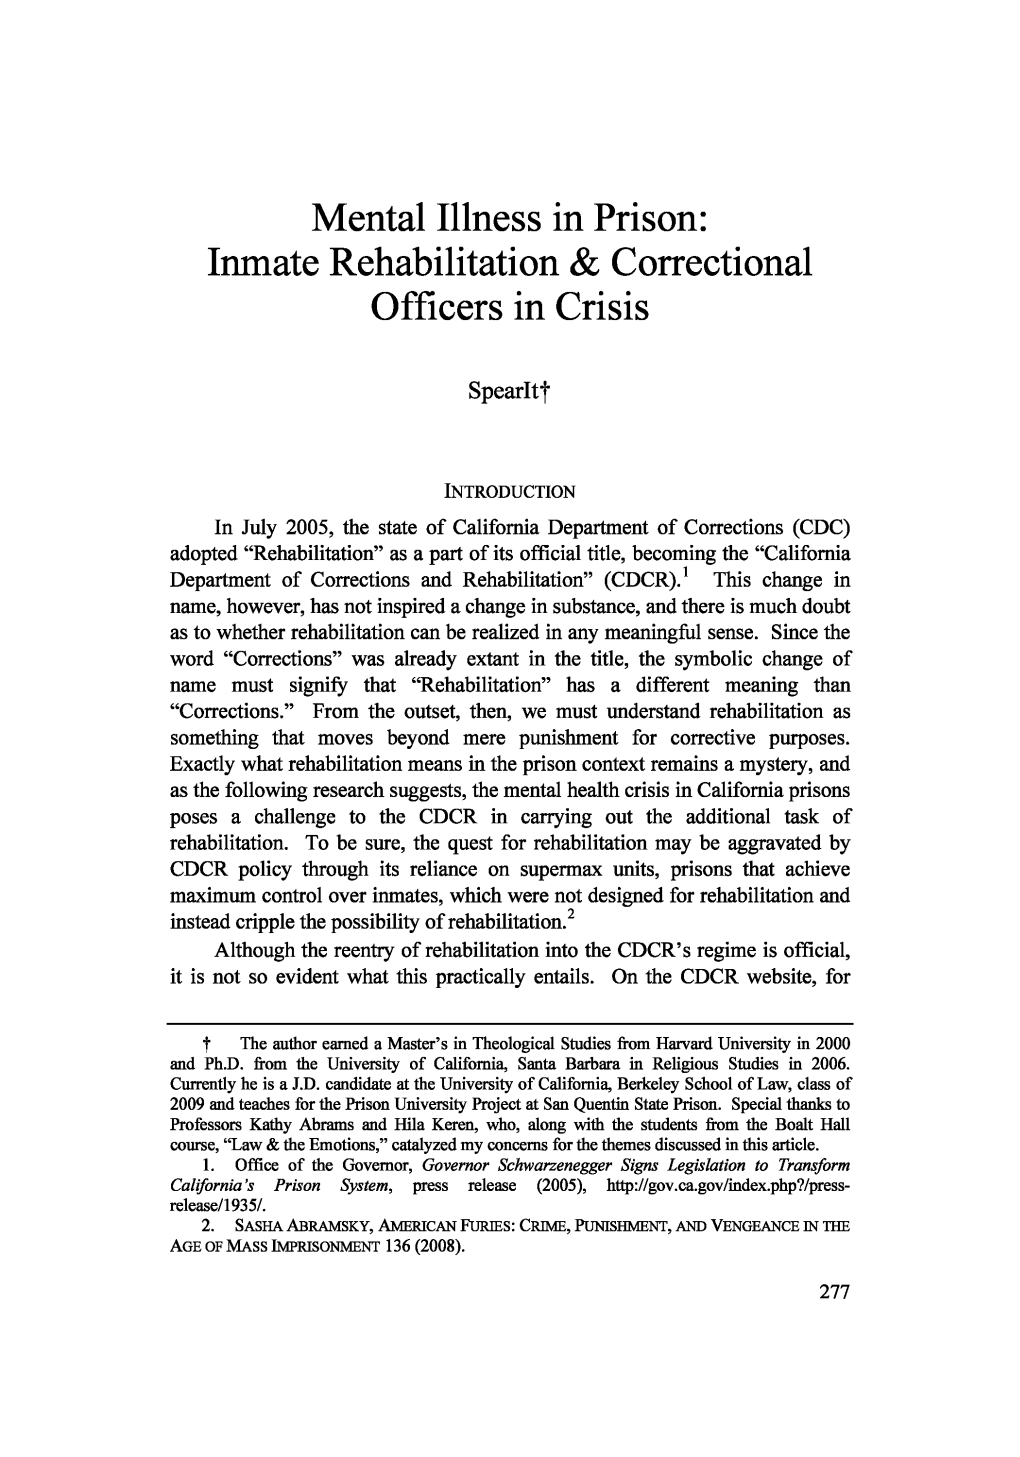 Mental Illness in Prison: Inmate Rehabilitation &Correctional Officers in Crisis